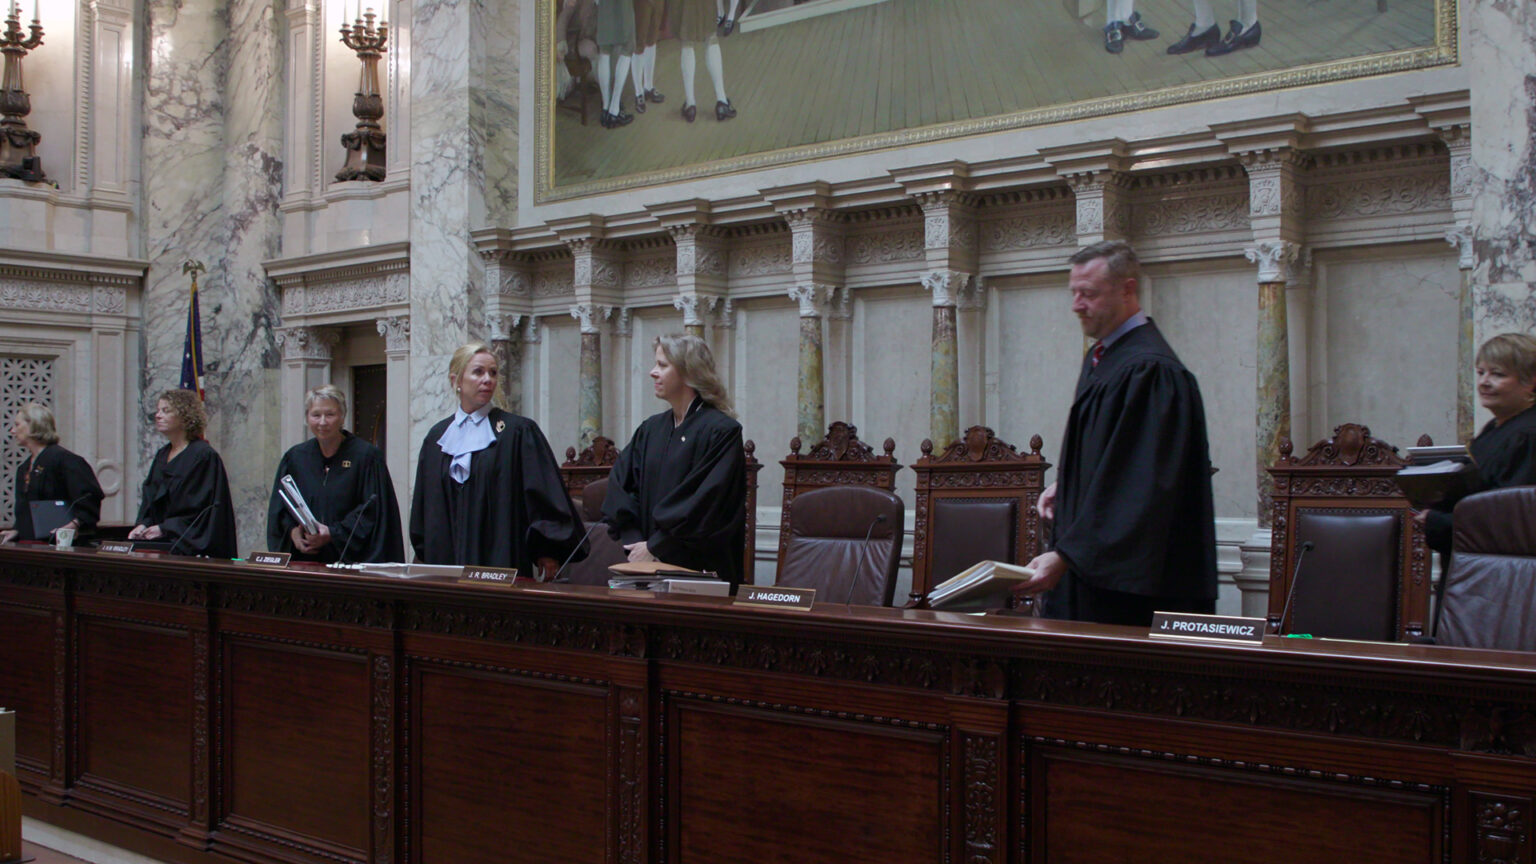 From left to right, Jill Karofsky, Rebecca Dallet, Ann Walsh Bradley Annette Ziegler, Rebecca Bradley, Brian Hagedorn and Janet Protasiewicz stand at a judicial dais amid a row of high-backed leather chairs, with another row of high-backed wood and leather chairs behind them, in a room with marble masonry, a large painting and a U.S. flag.